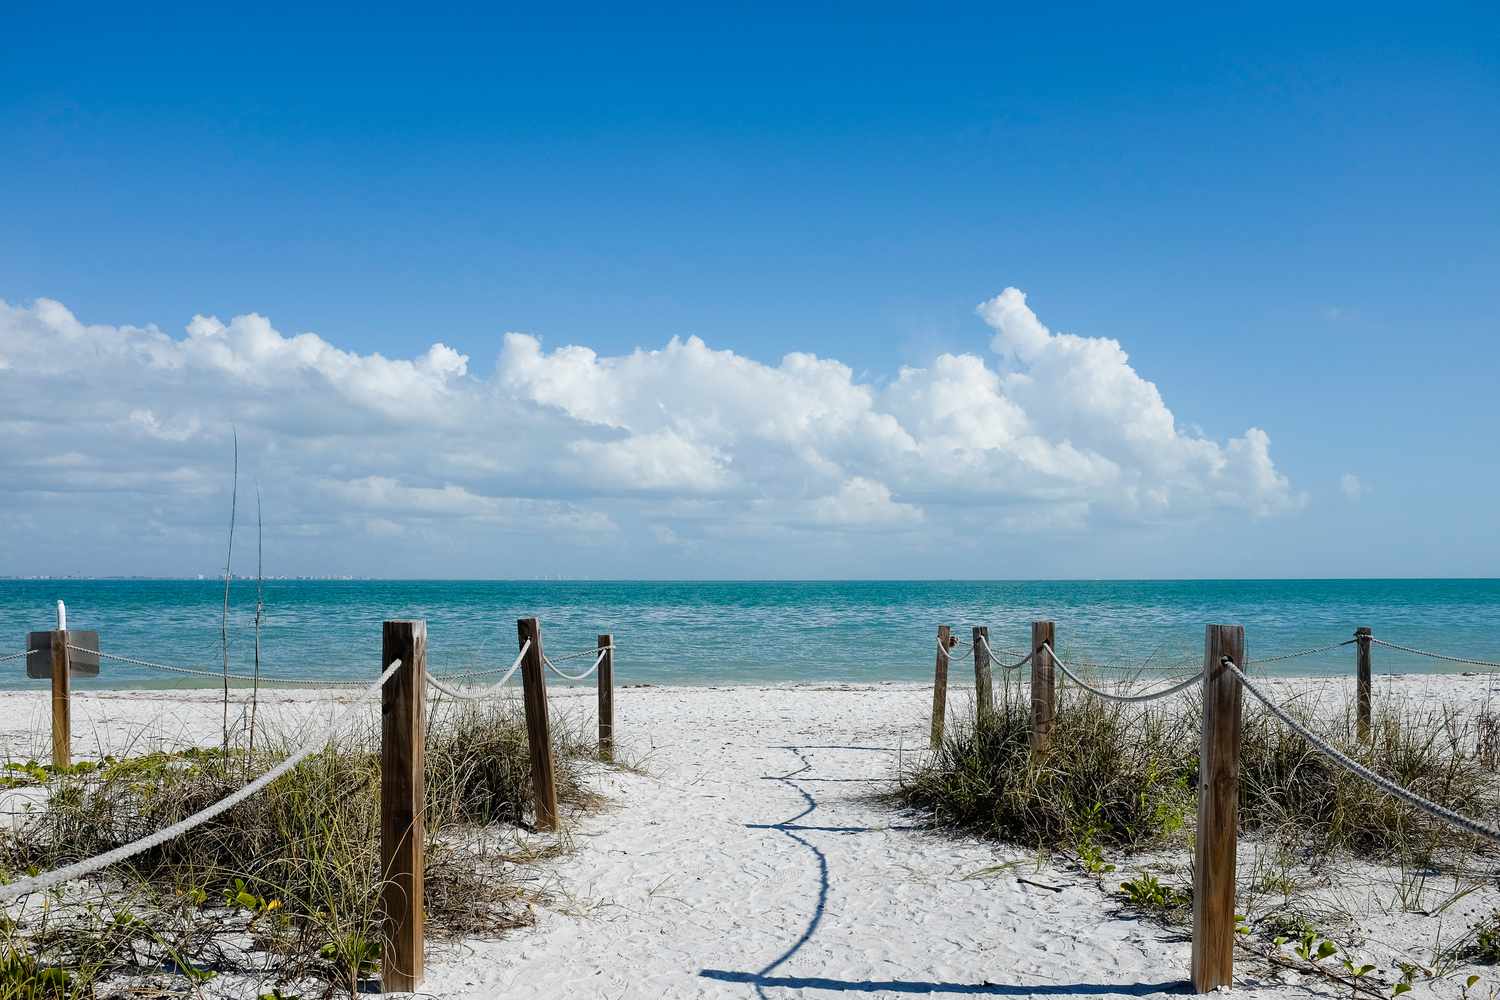 Florida is the second most popular state for beach